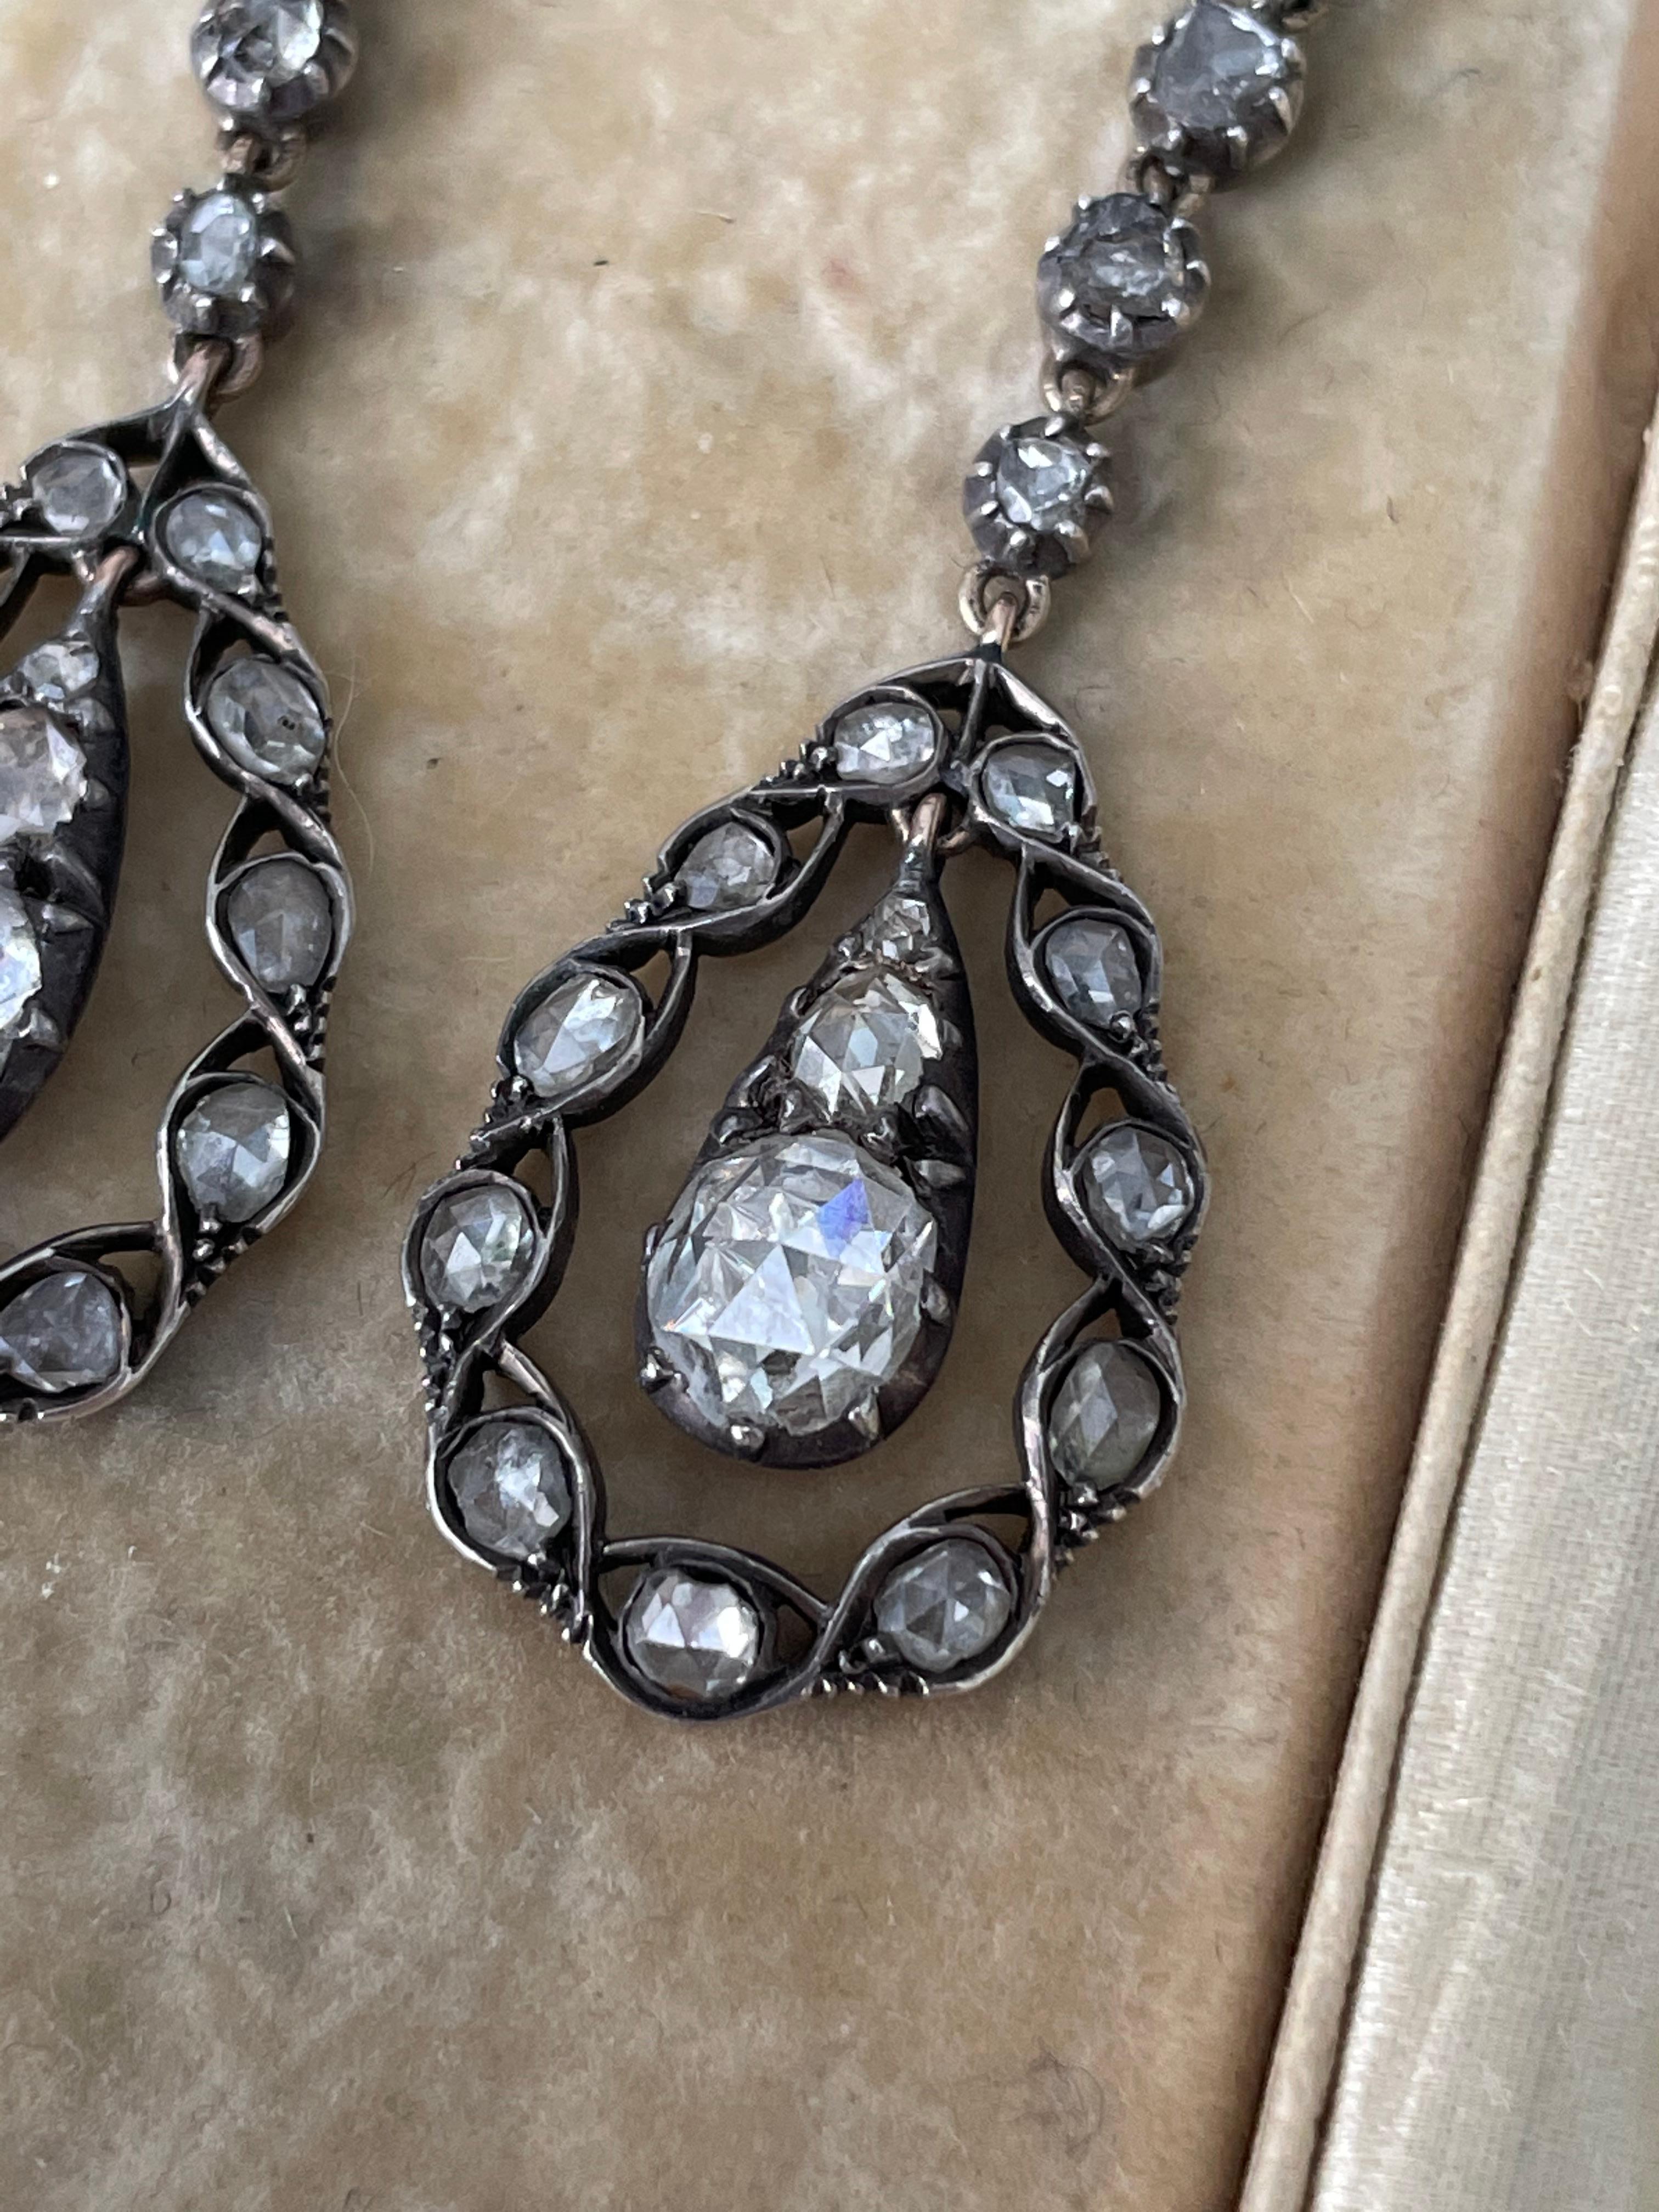 These romantic mid-Victorian diamond pendant earrings are composed of a course of four graduated rose-cut diamonds gracefully dangling a glittering rose-cut diamond frame, suspending a ravishing rose-cut diamond drop. Hand fabricated in darkened